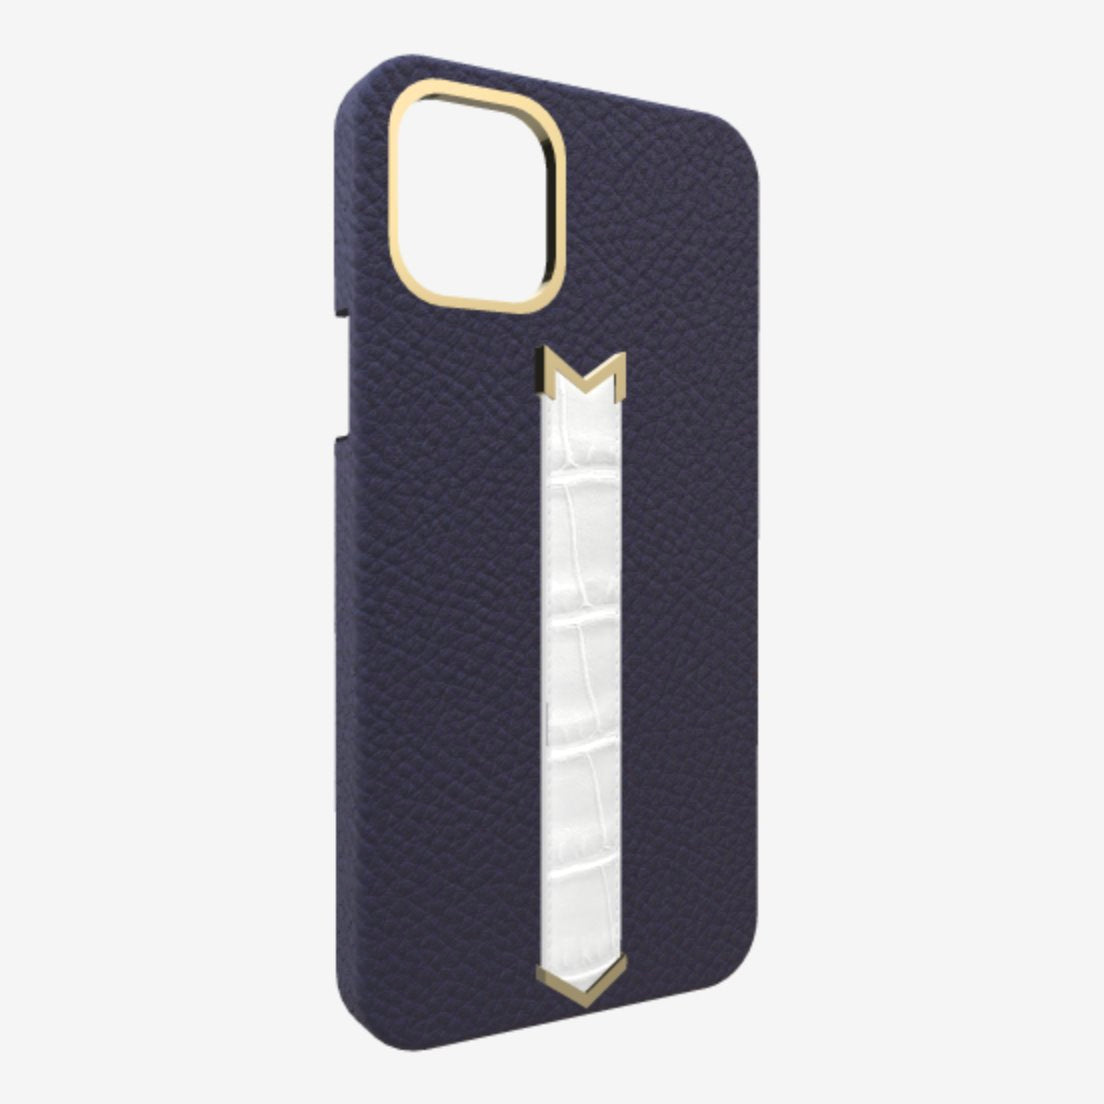 Gold Finger Strap Case for iPhone 13 Pro Max in Genuine Calfskin and Alligator Navy Blue White Angel 